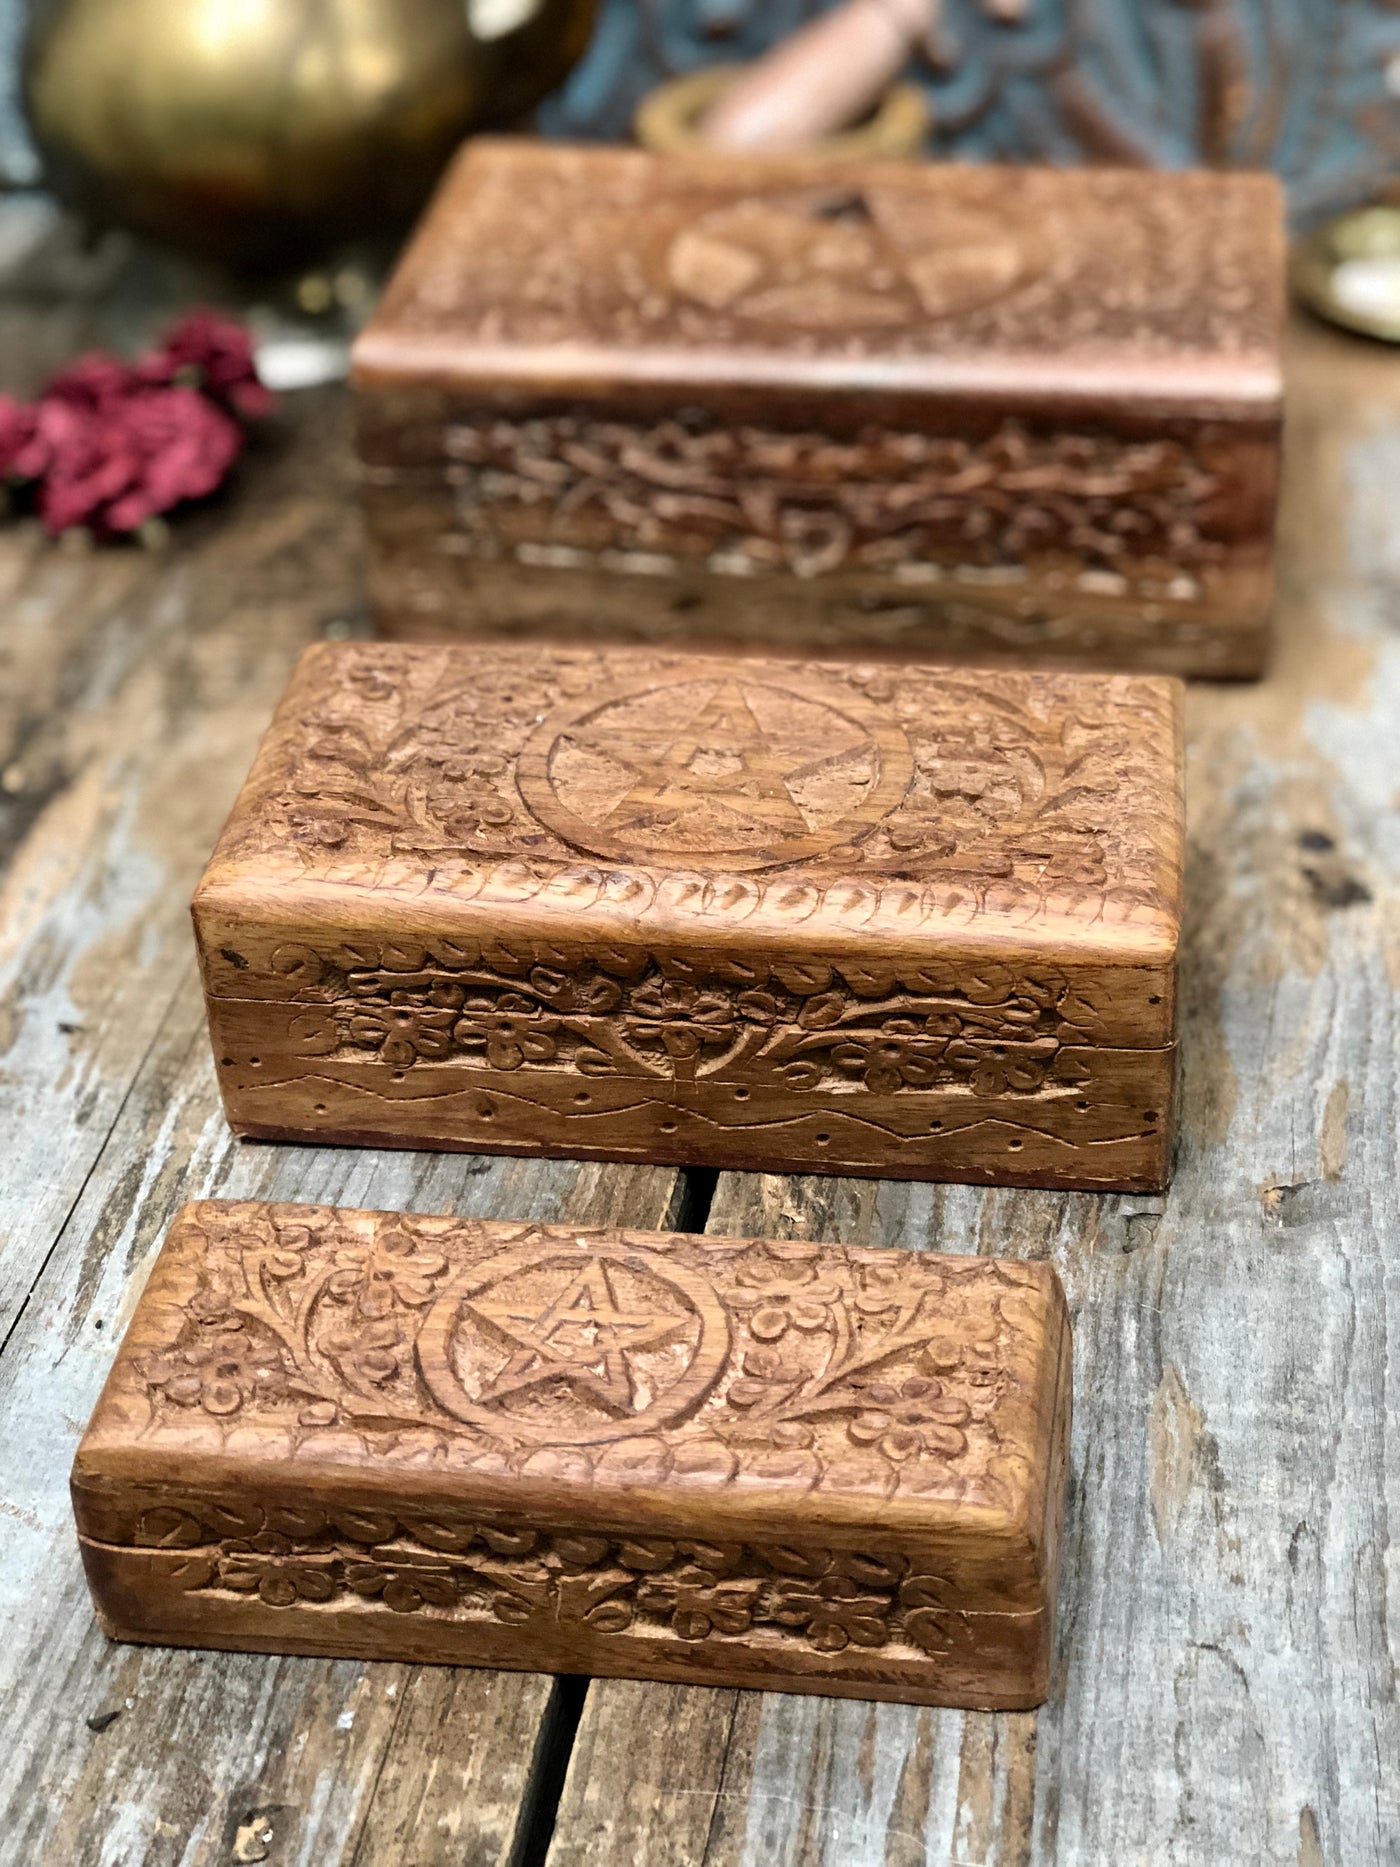 Three wooden boxes carved with a pentagram on the lid.